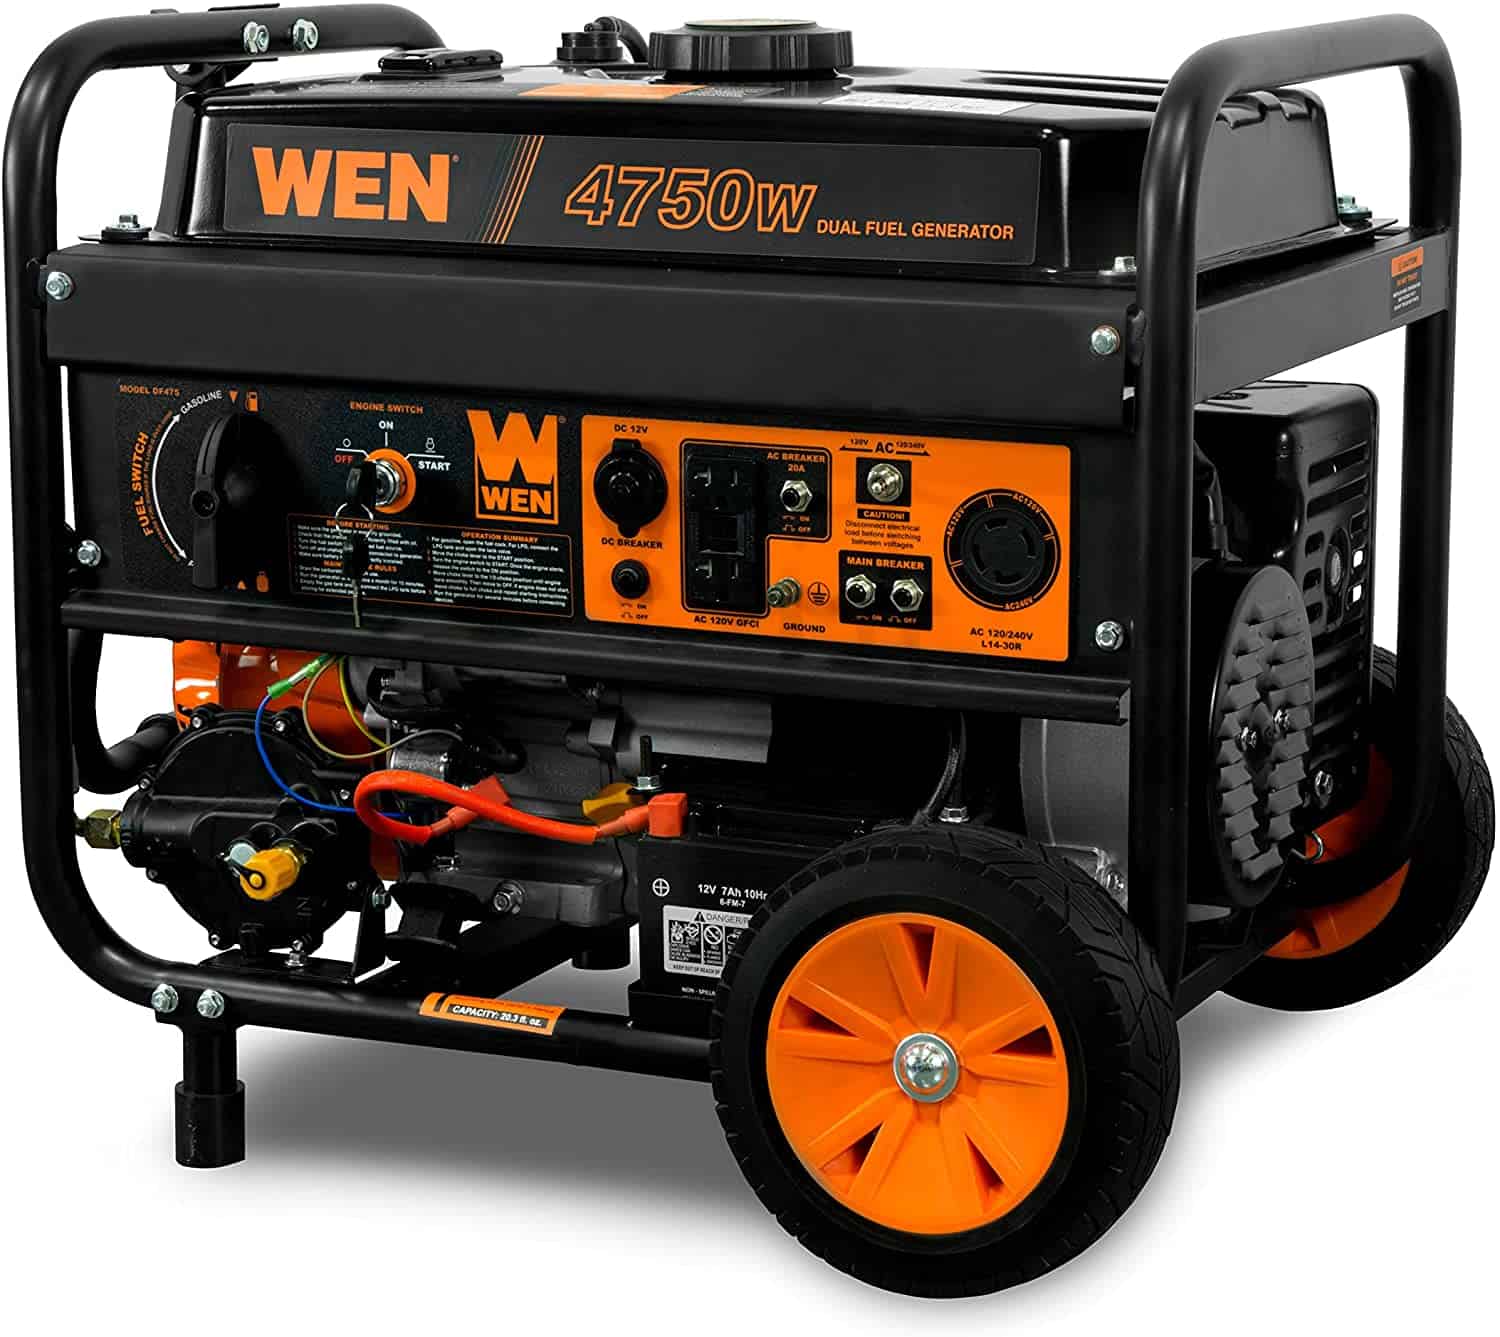 7 Best Portable Generators for Home Backup Reviews